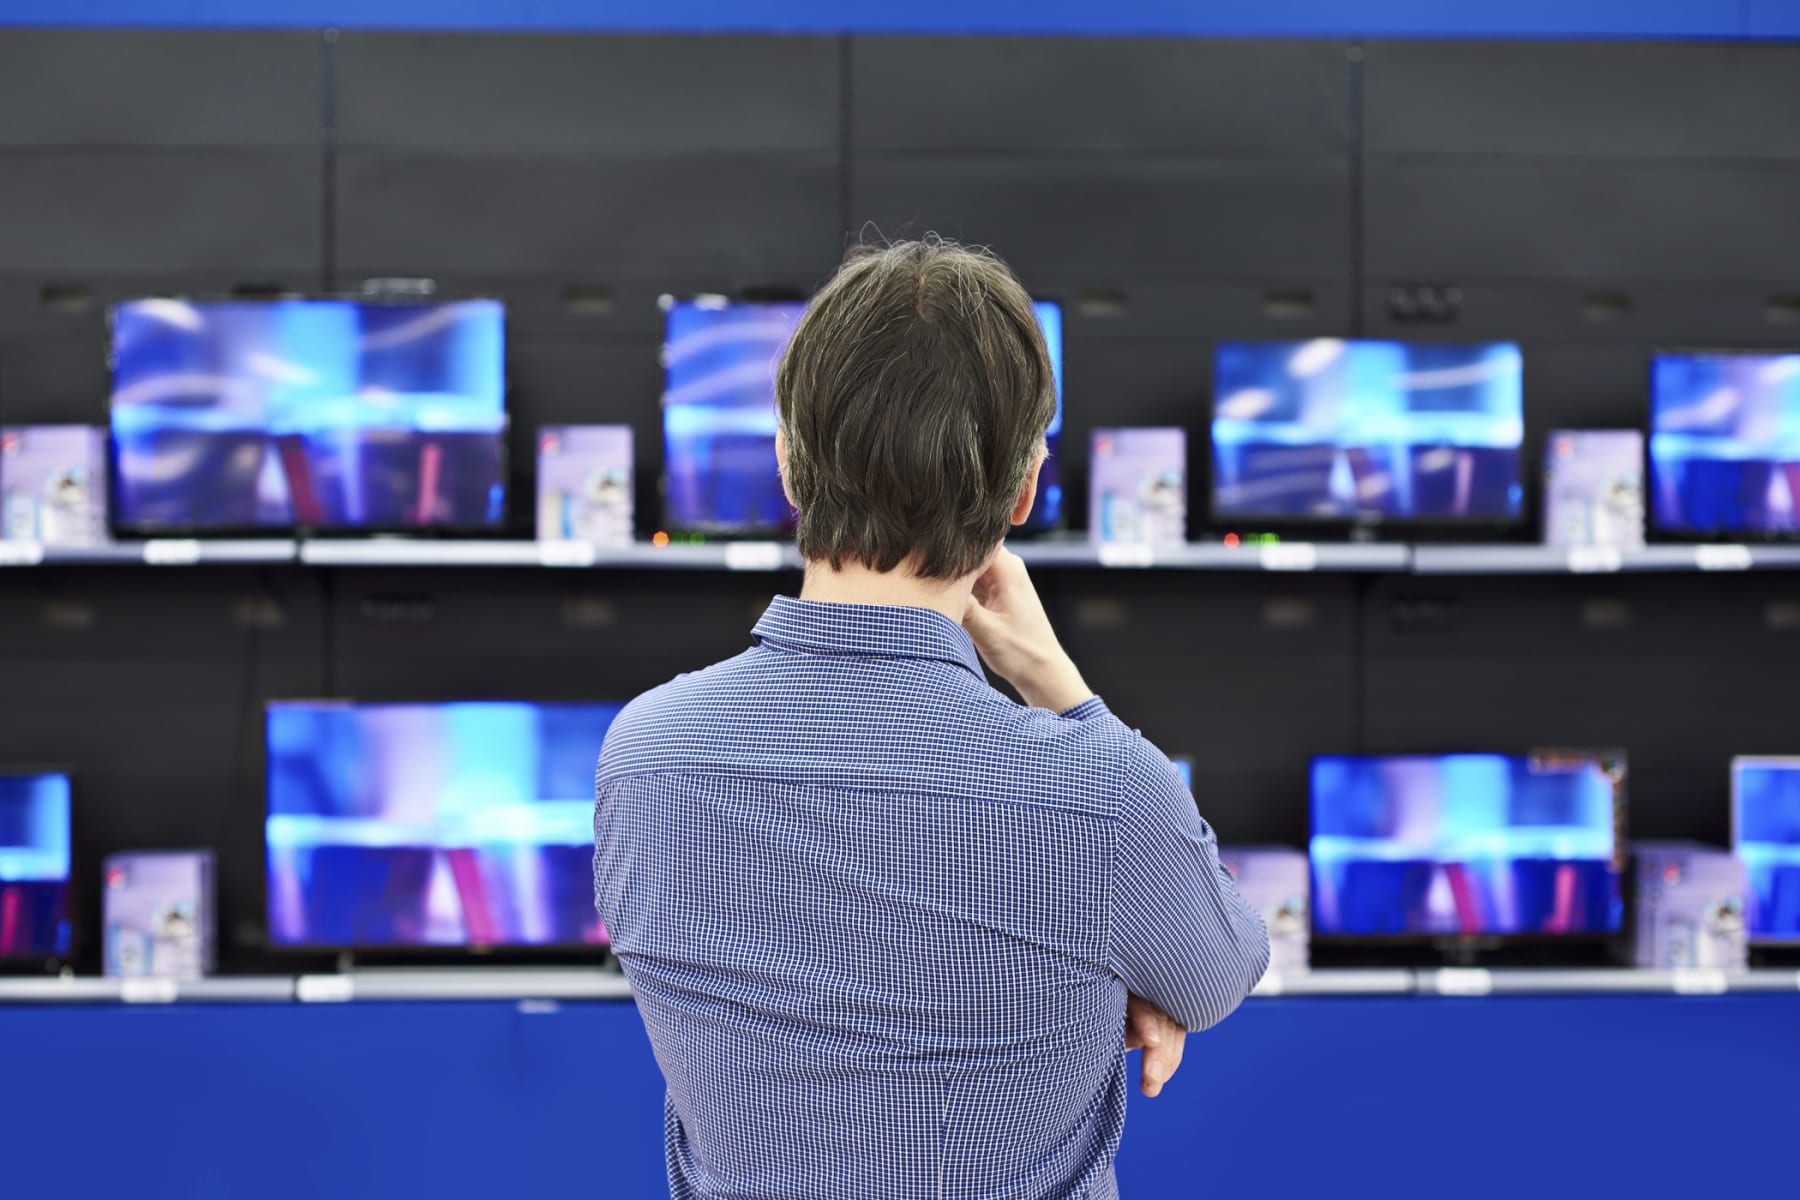 Man stands in front of television display.